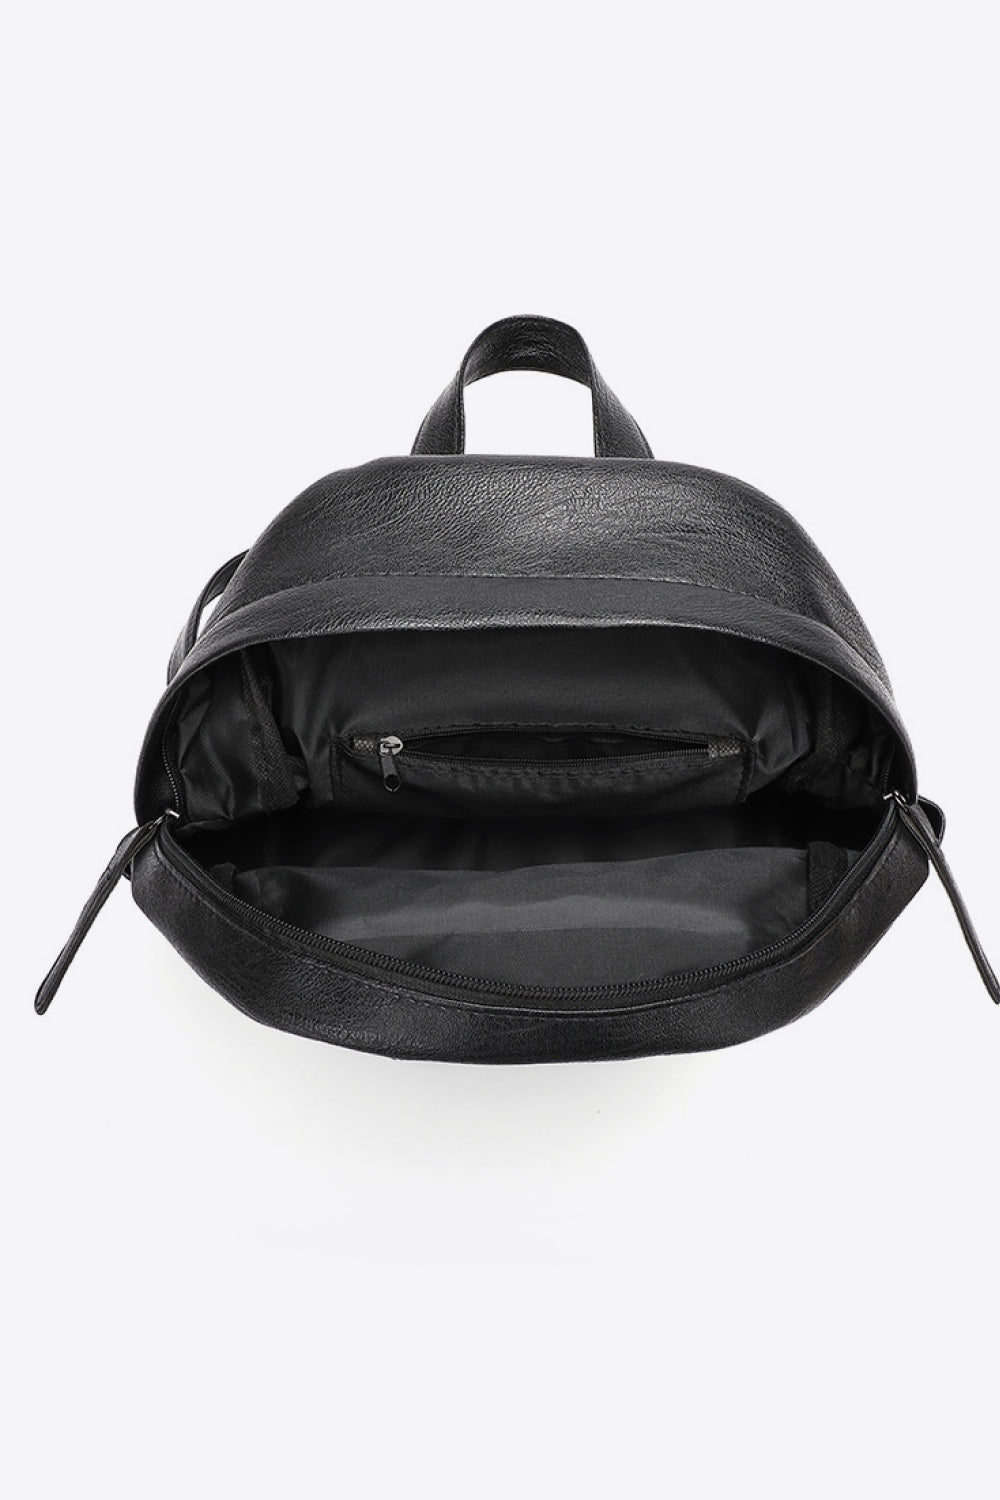 Black PU Leather Backpack - backpack at TFC&H Co.